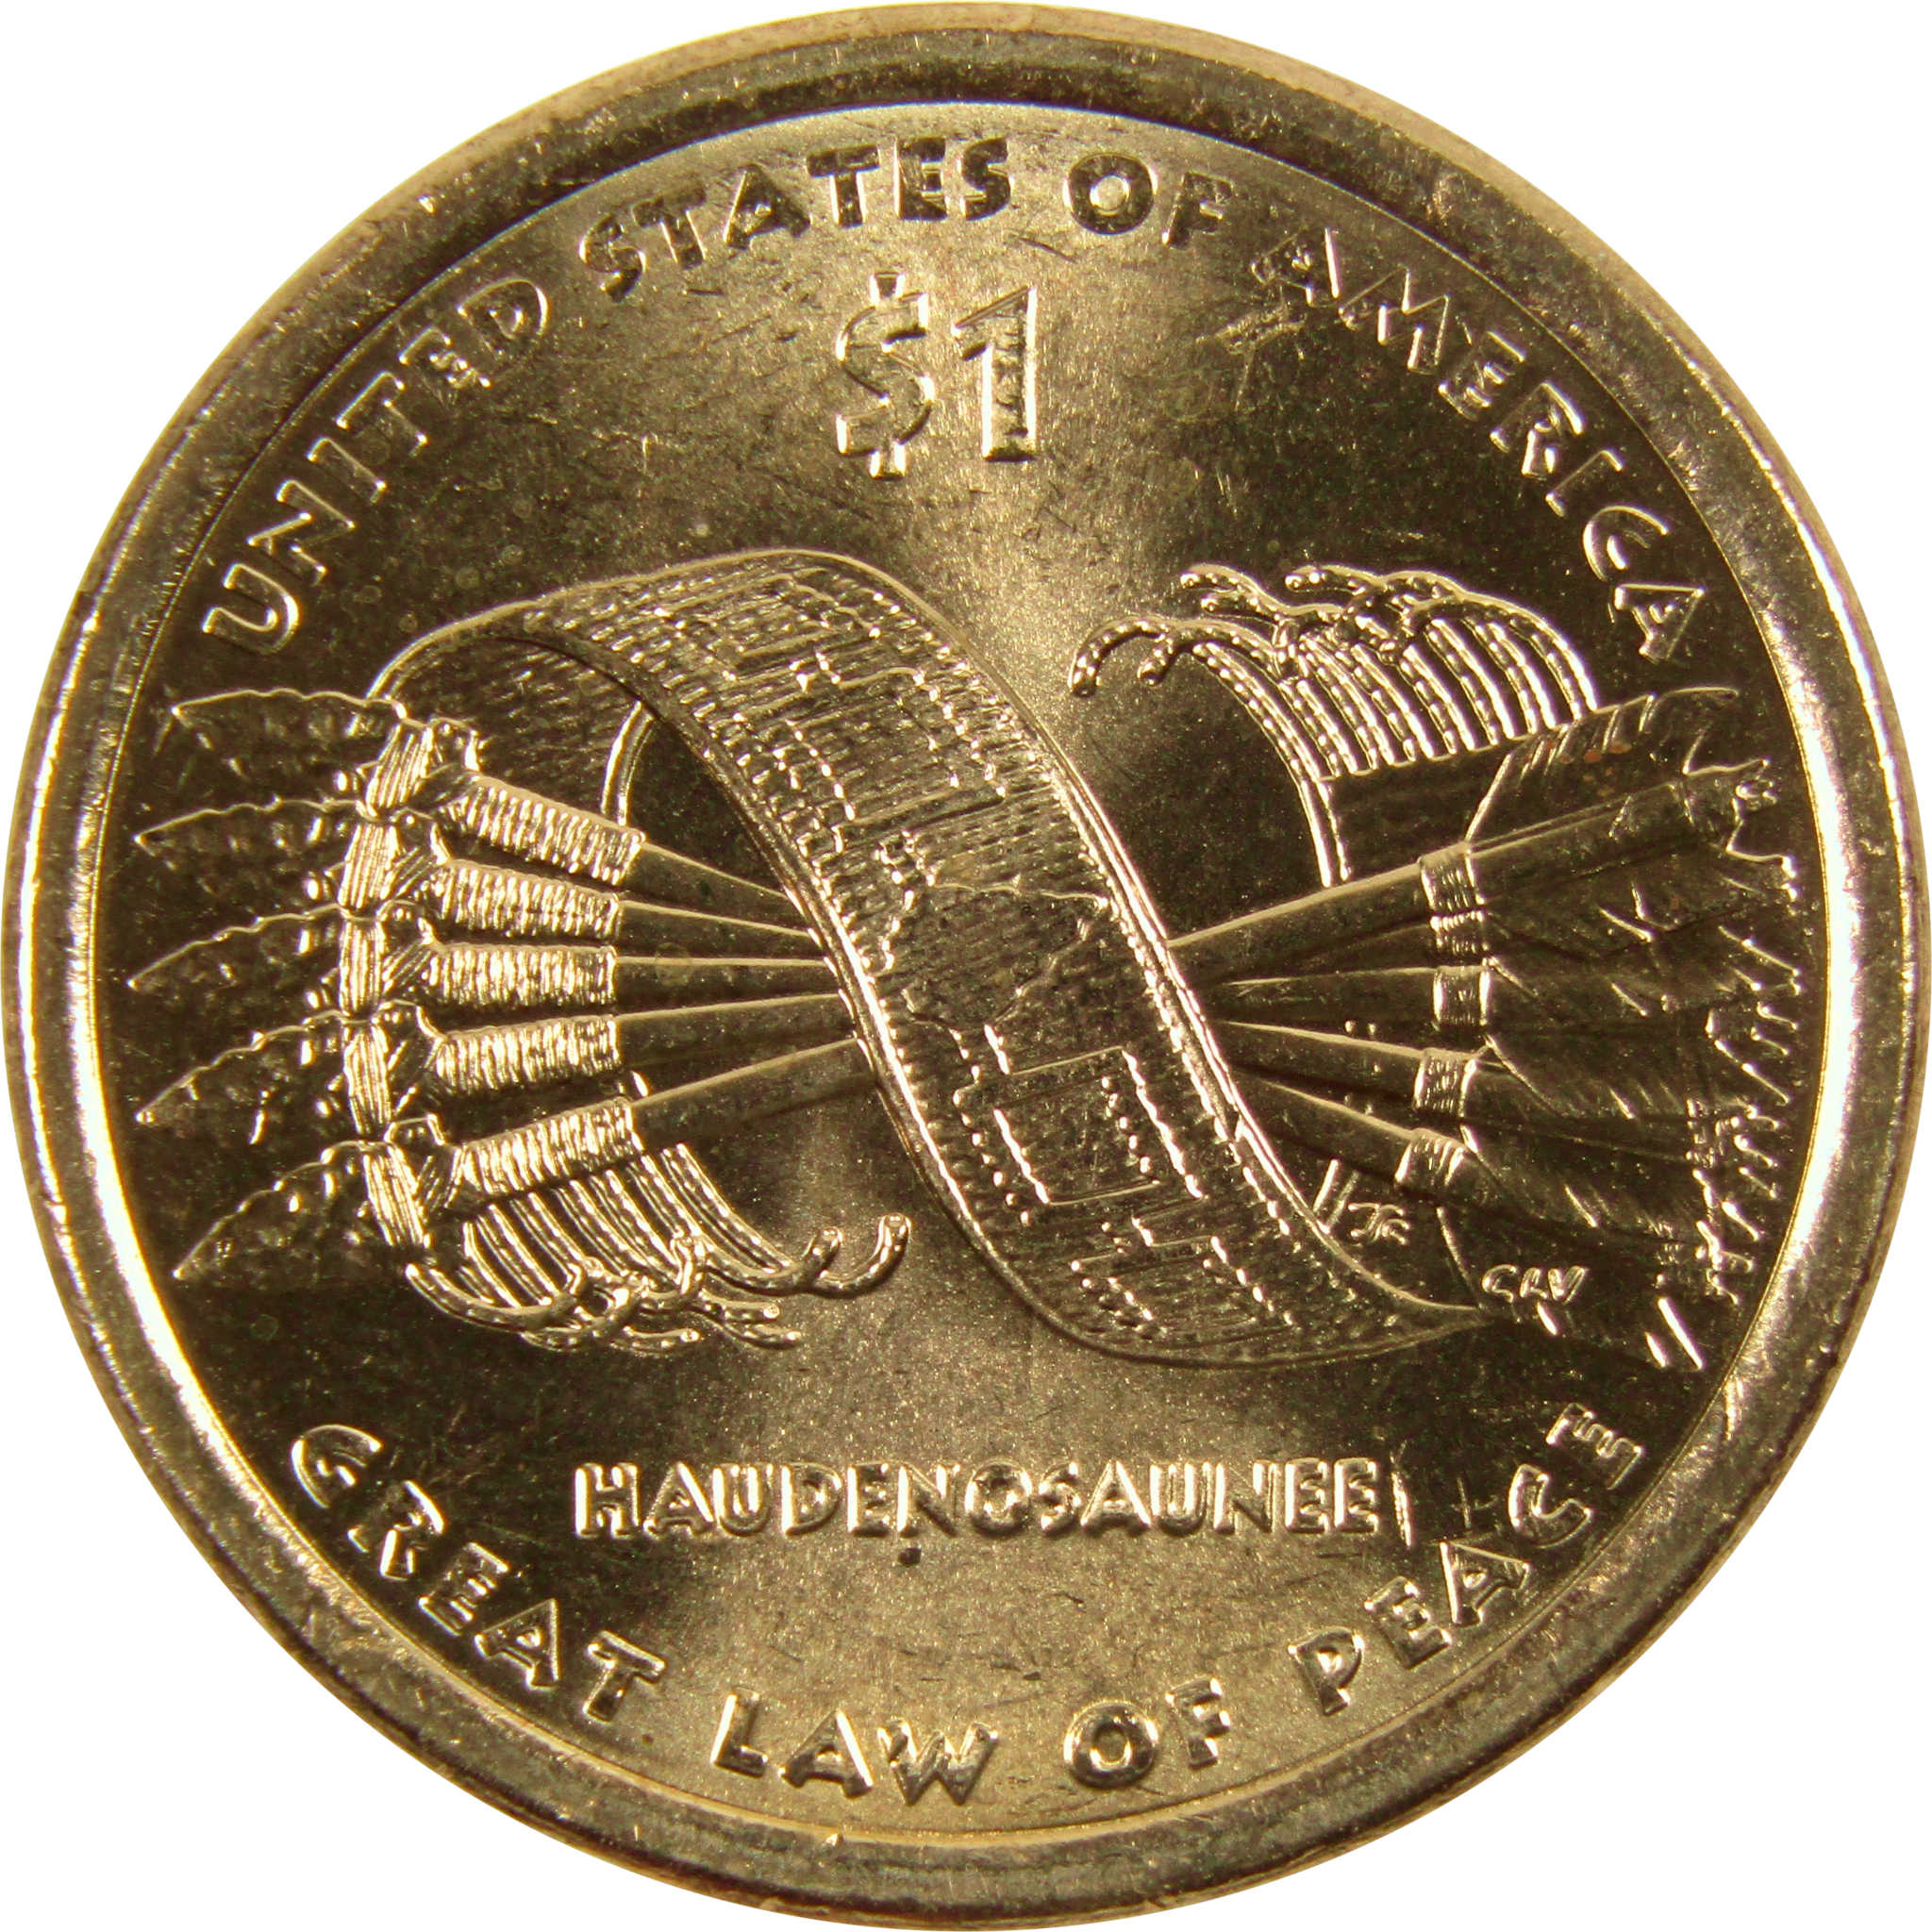 2010 D Great Law of Peace Native American Dollar BU Uncirculated $1